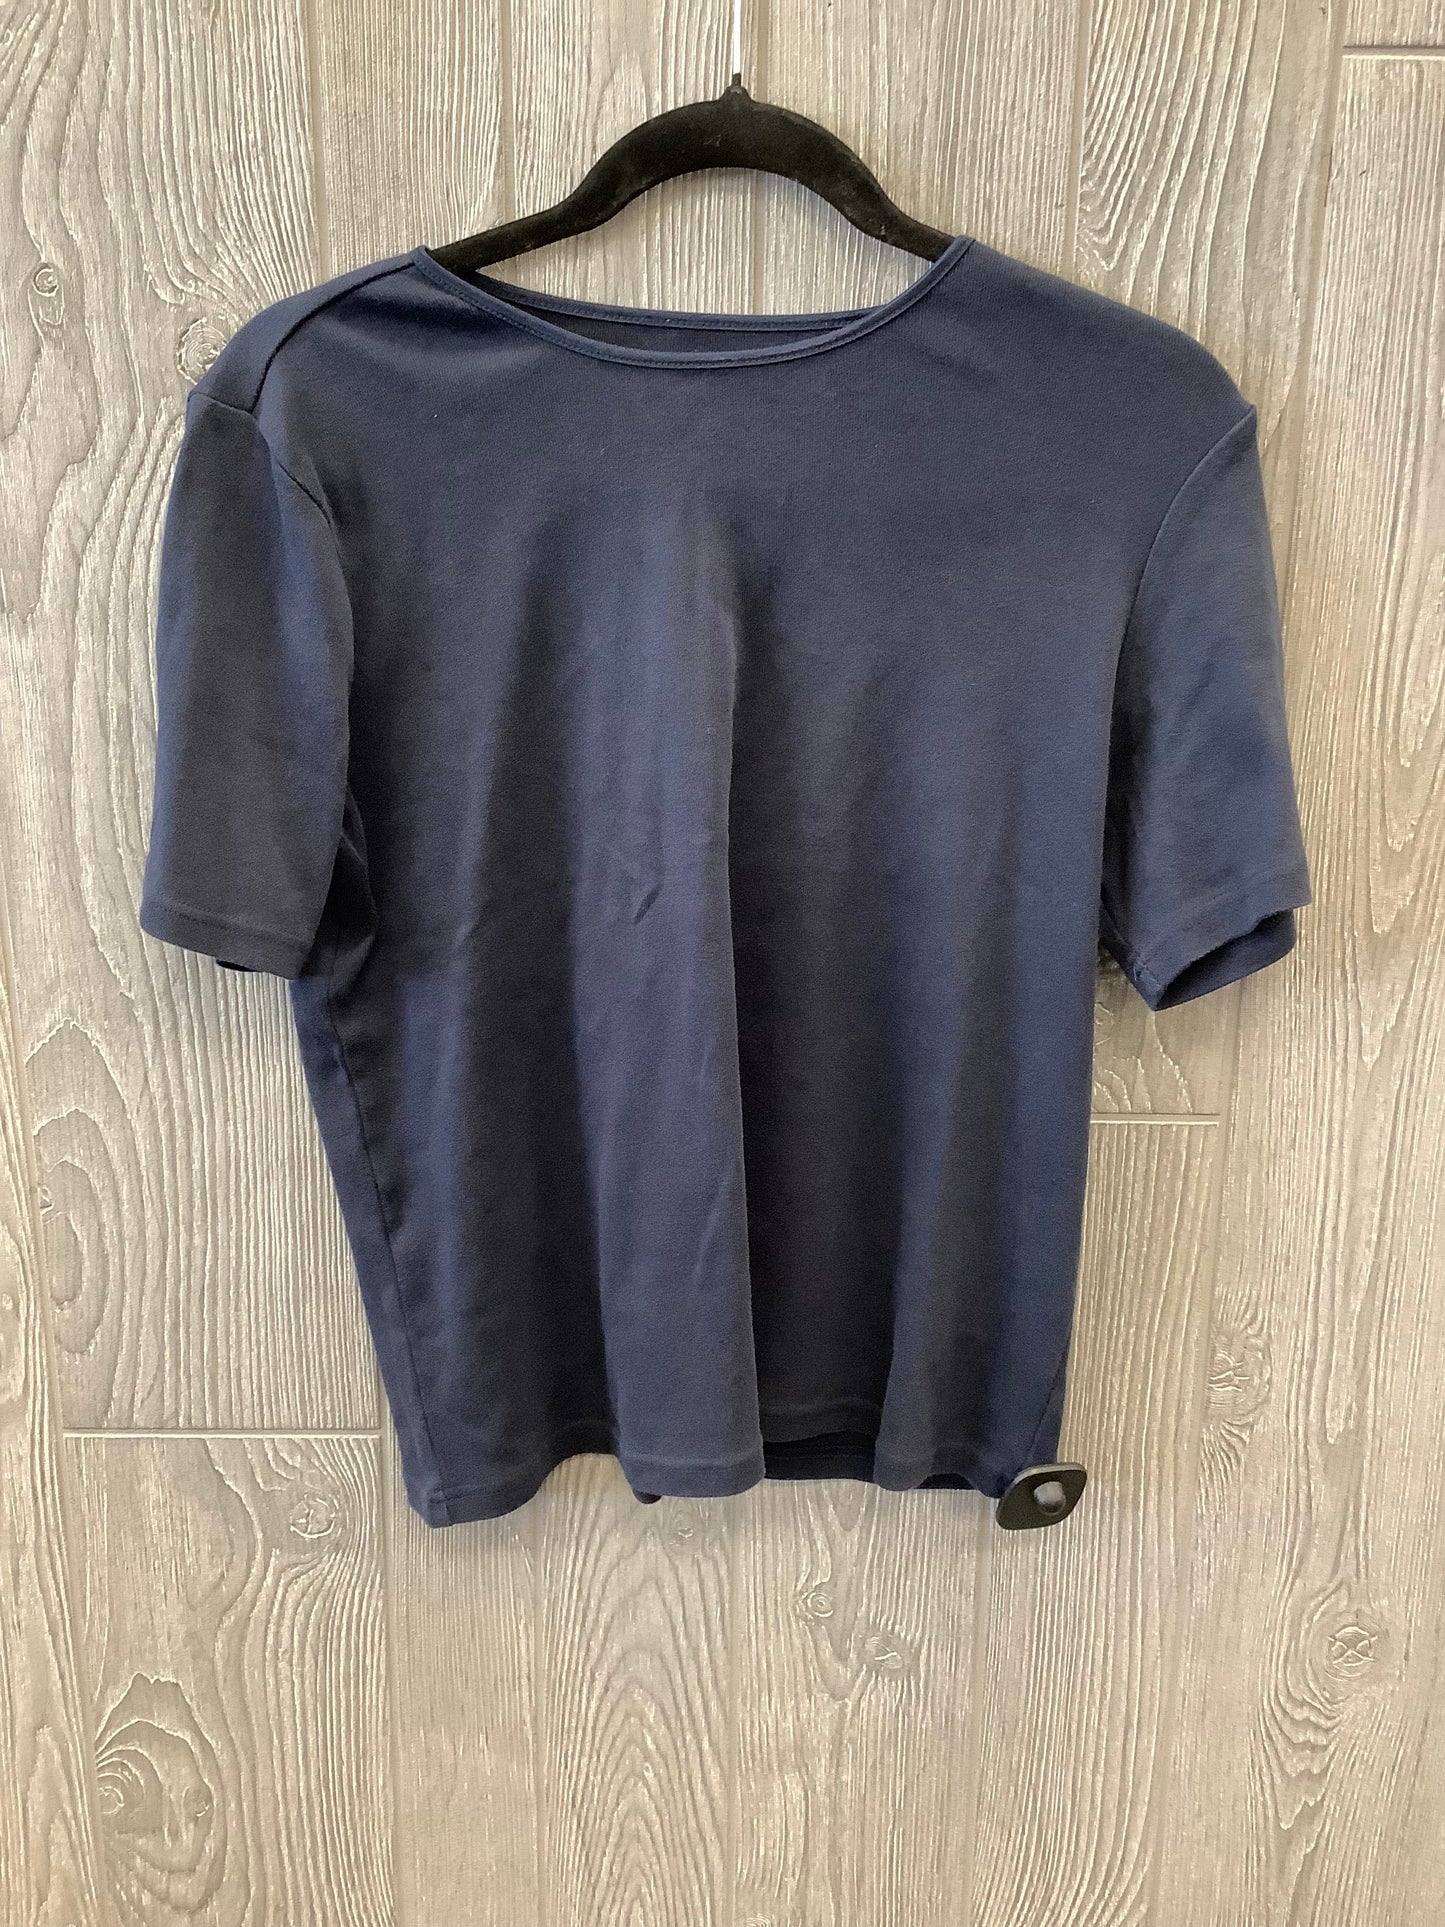 Navy Top Short Sleeve Basic Christopher And Banks, Size M